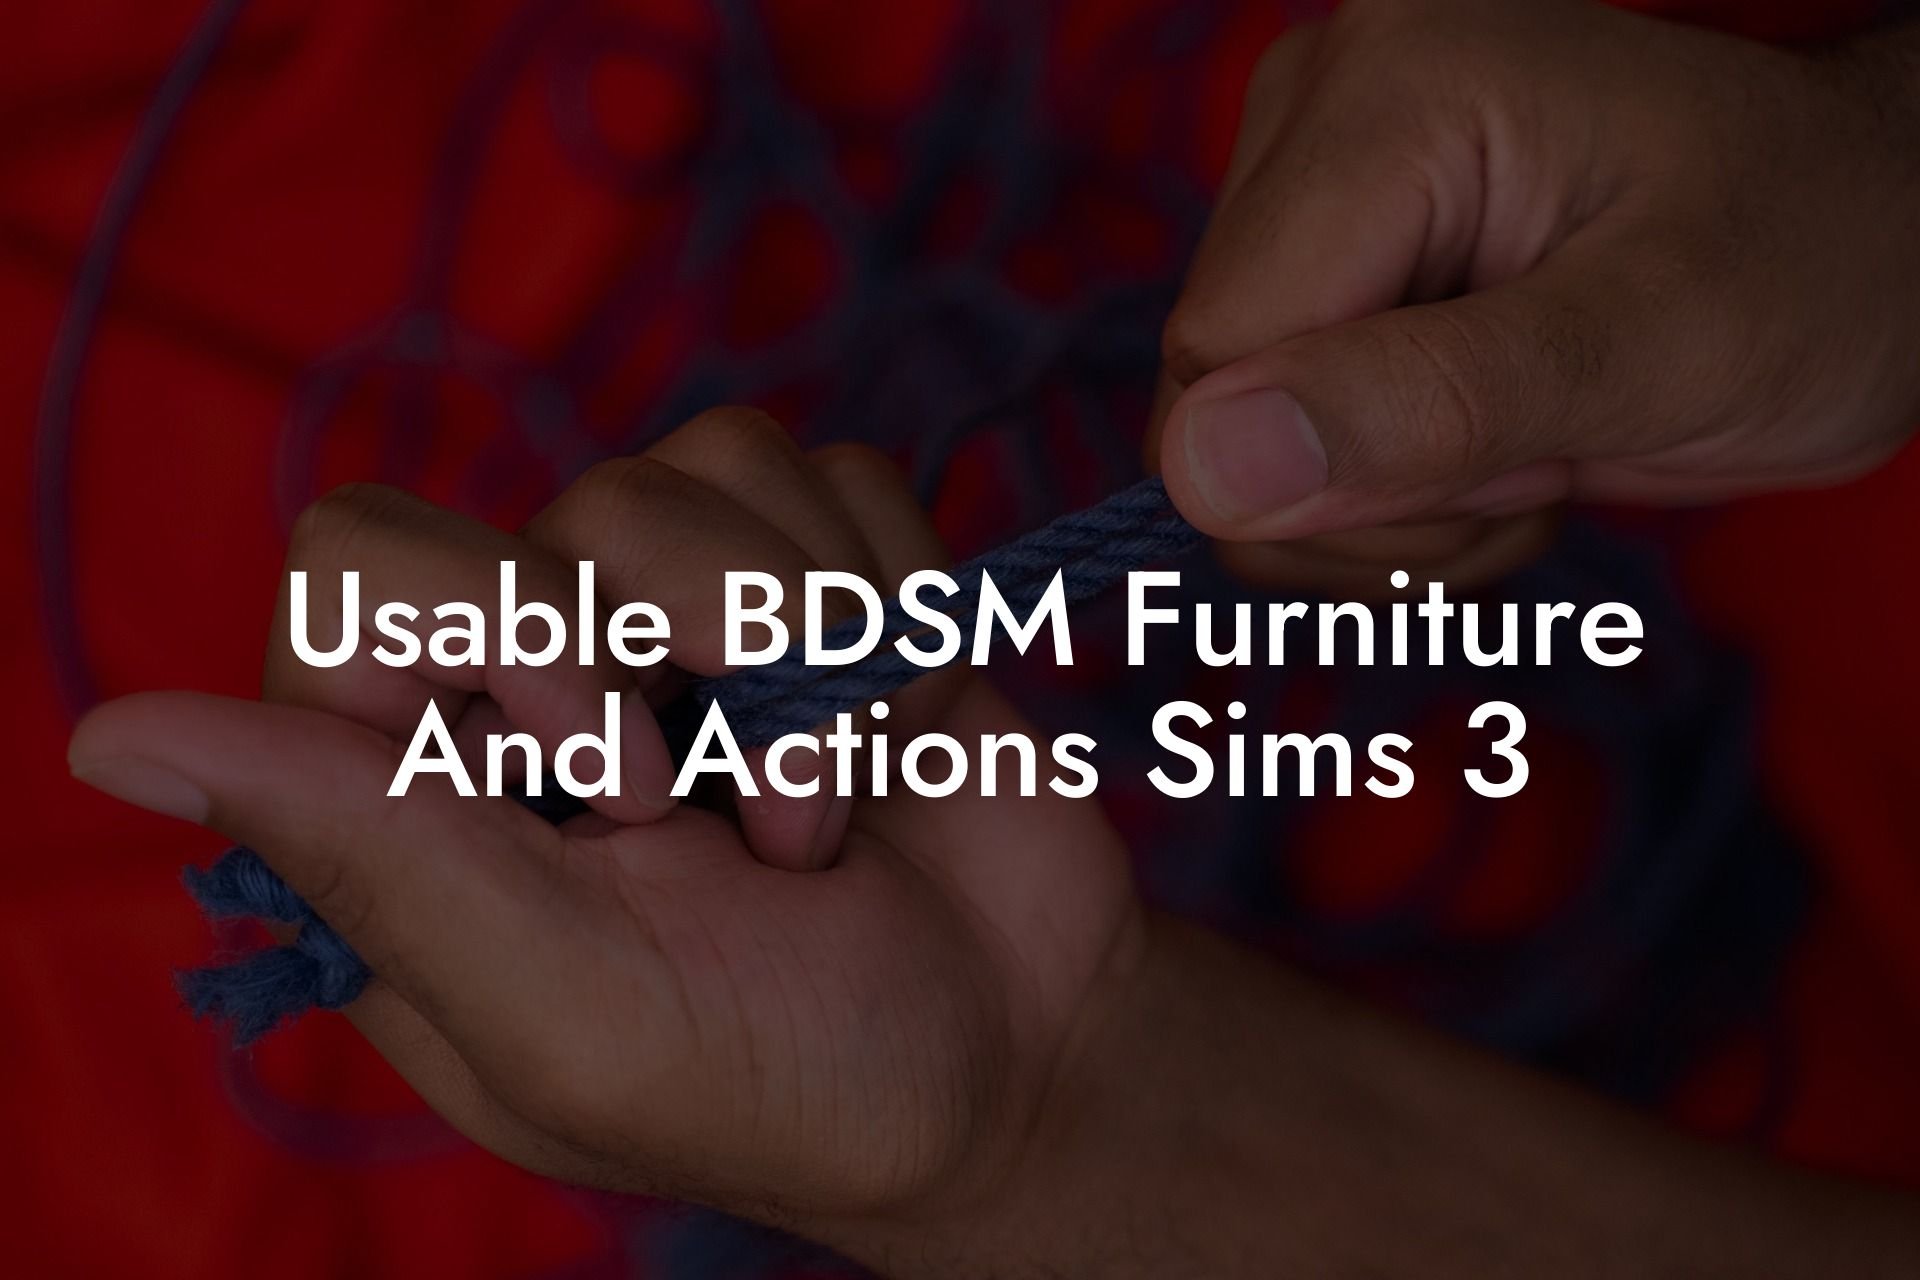 Usable BDSM Furniture And Actions Sims 3